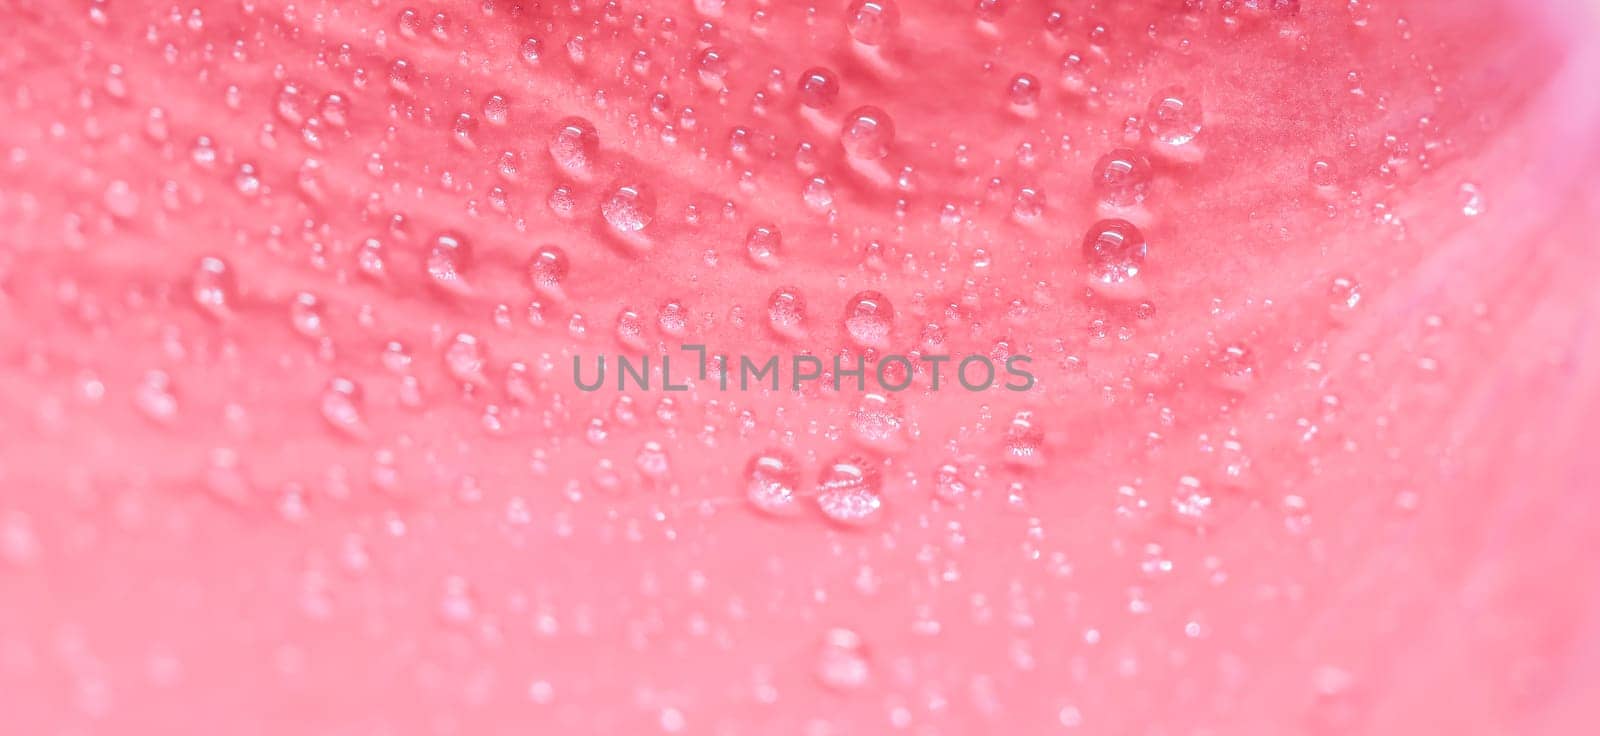 Background of pink rose petals with dew drops. Bokeh with light reflection. Macro blurred natural backdrop by Olayola